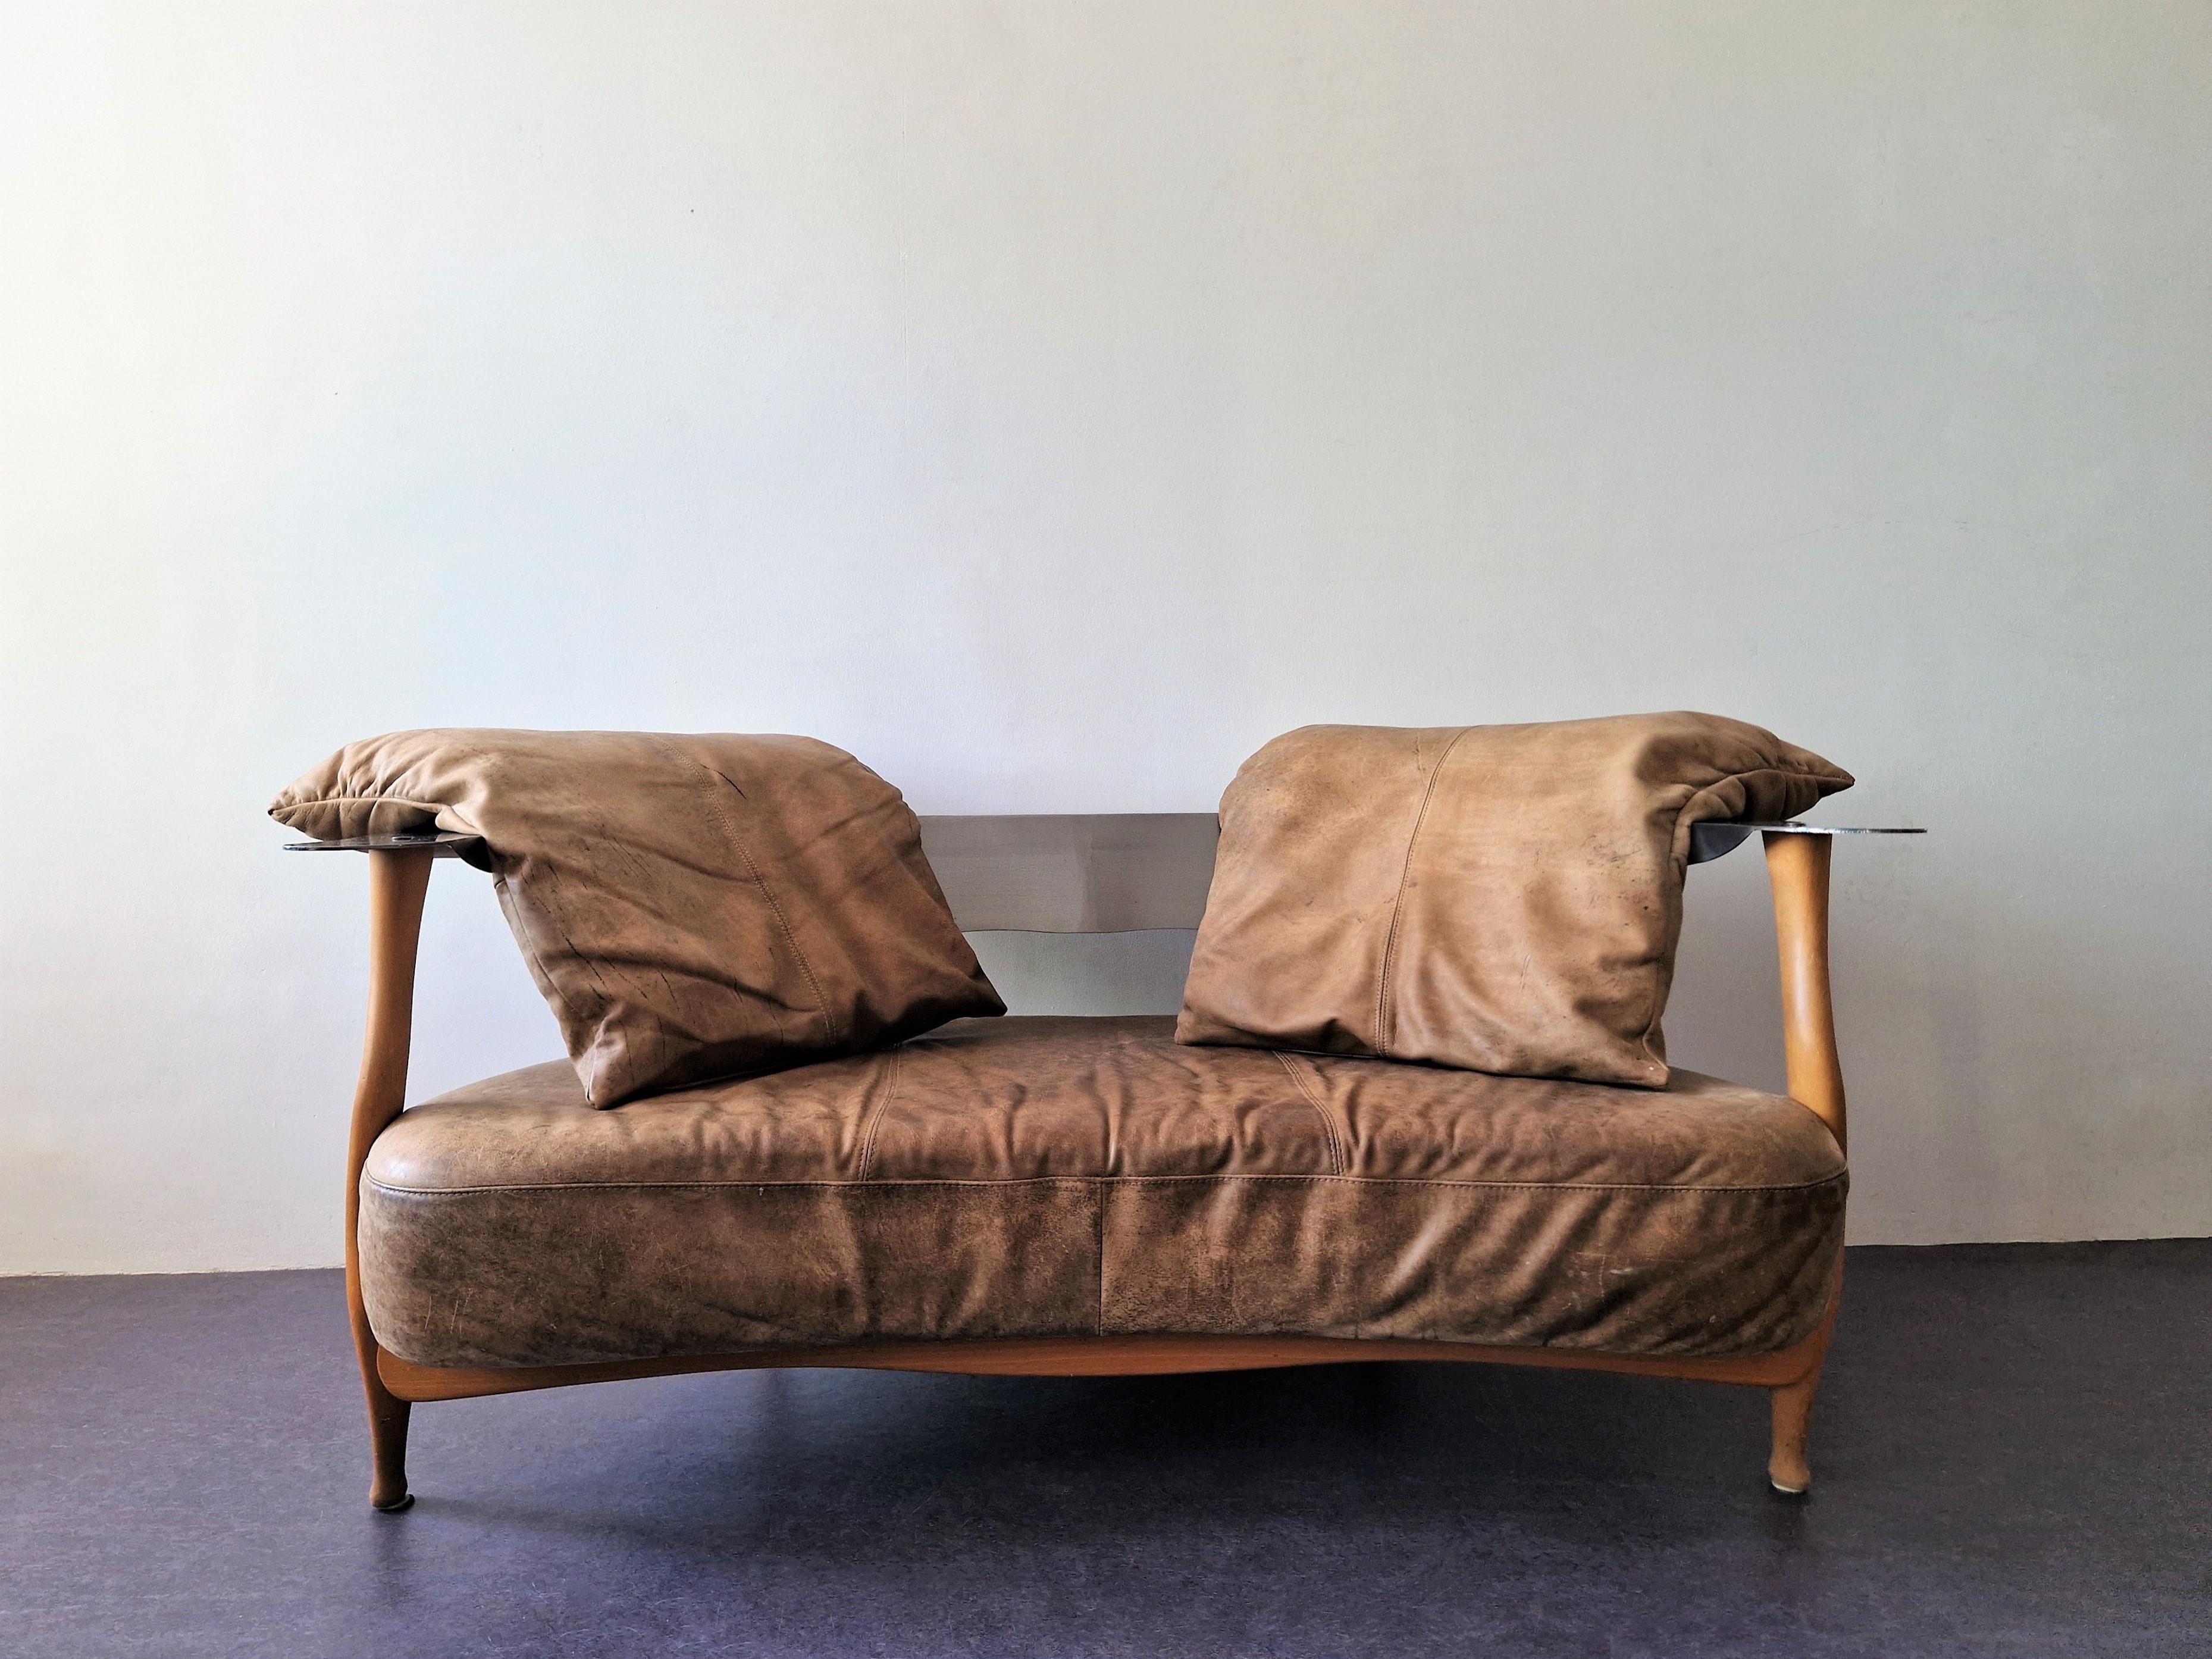 This sculptural 2-seater sofa was designed by the German designer Kurt Beier. It is part of the 'Fantasy Island' collection and has the model name 